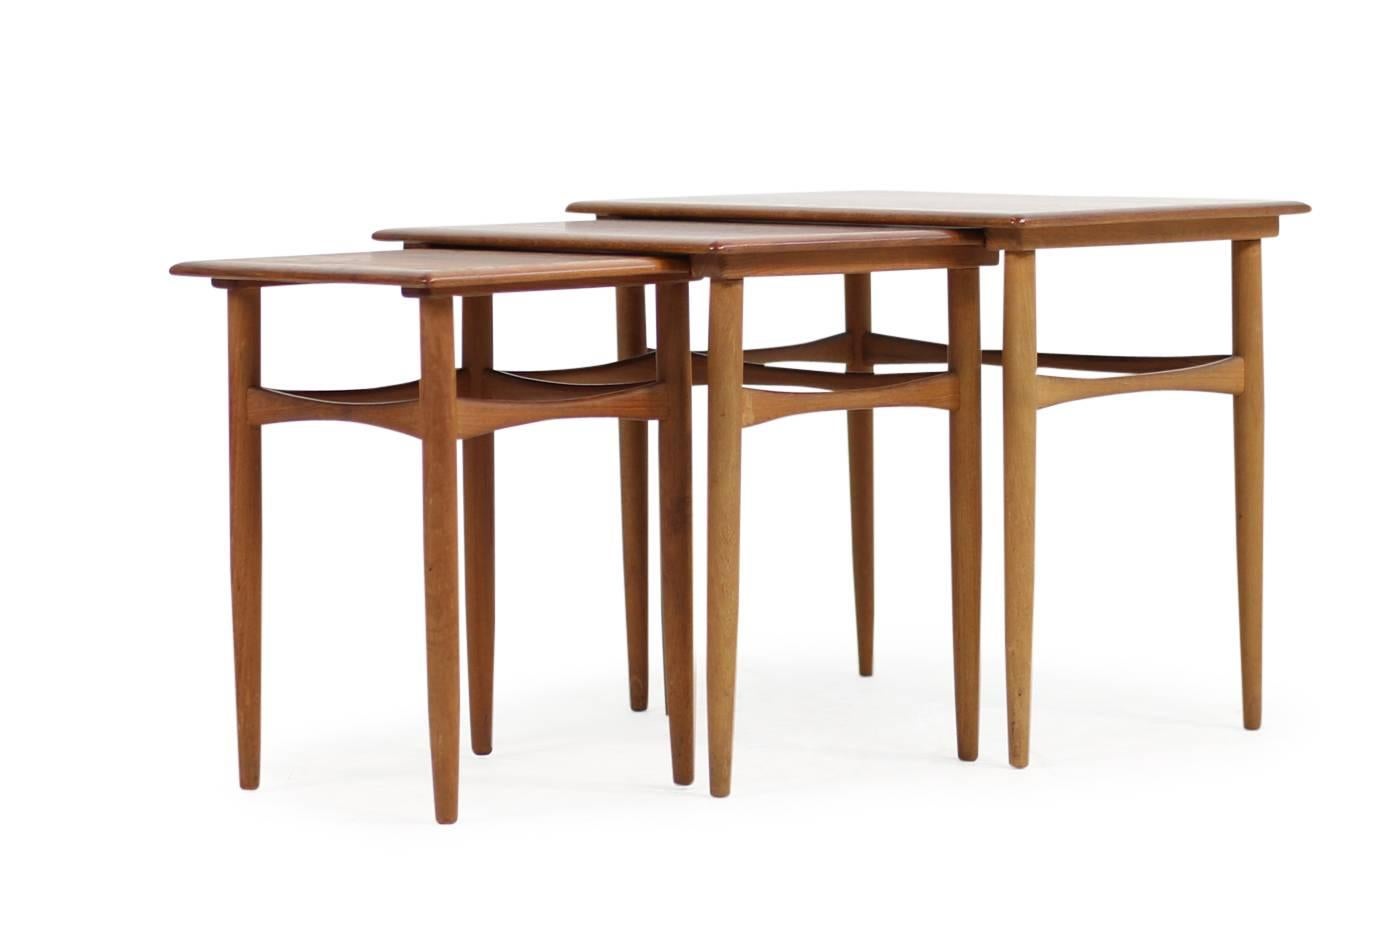 Beautiful set of three 1960s nesting tables, Danish modern design, very good condition.
The largest table is W x D x H 58 x 37 x 47cm
We have another set in rosewood, please visit our 1stdibs storefront.